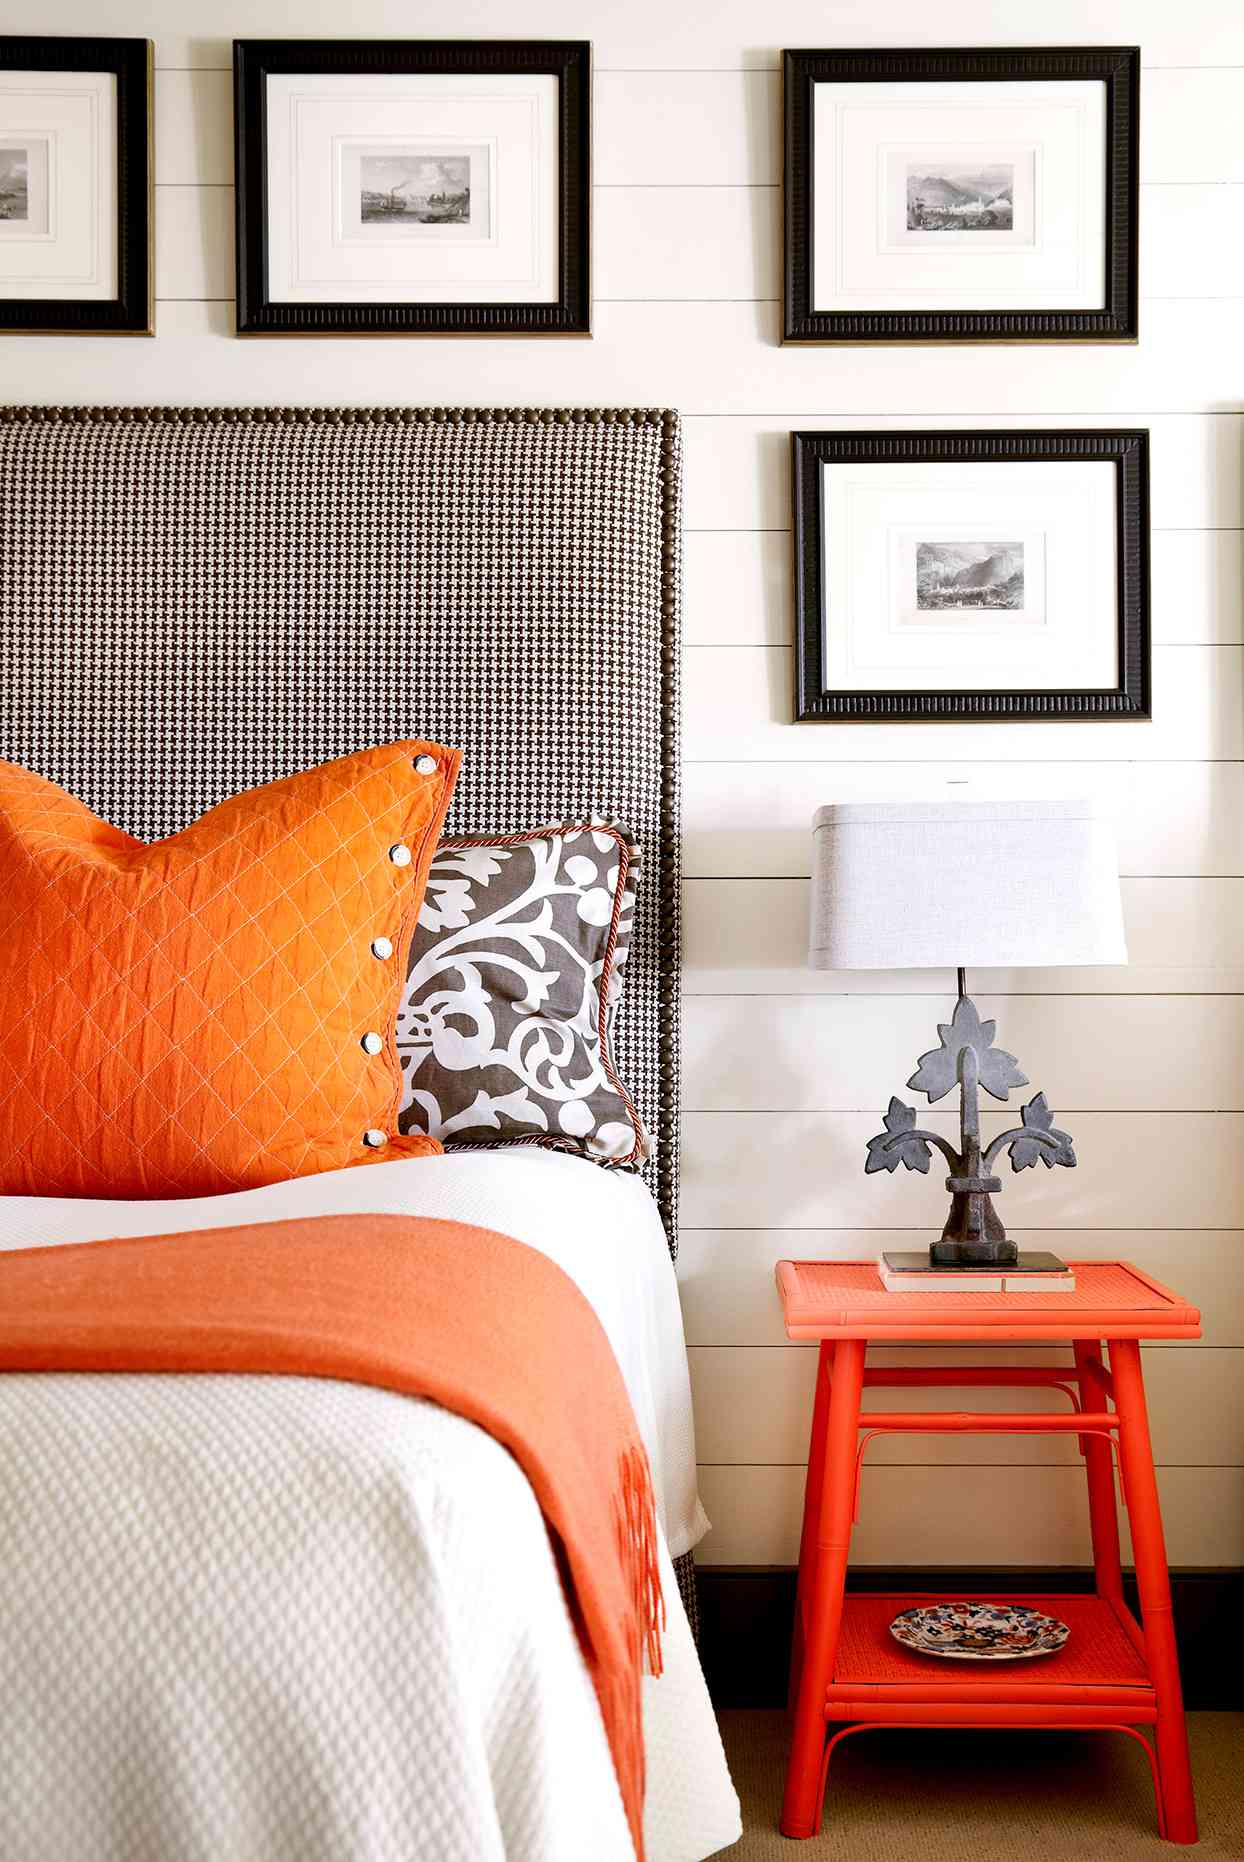 Black and white bedroom with orange accents